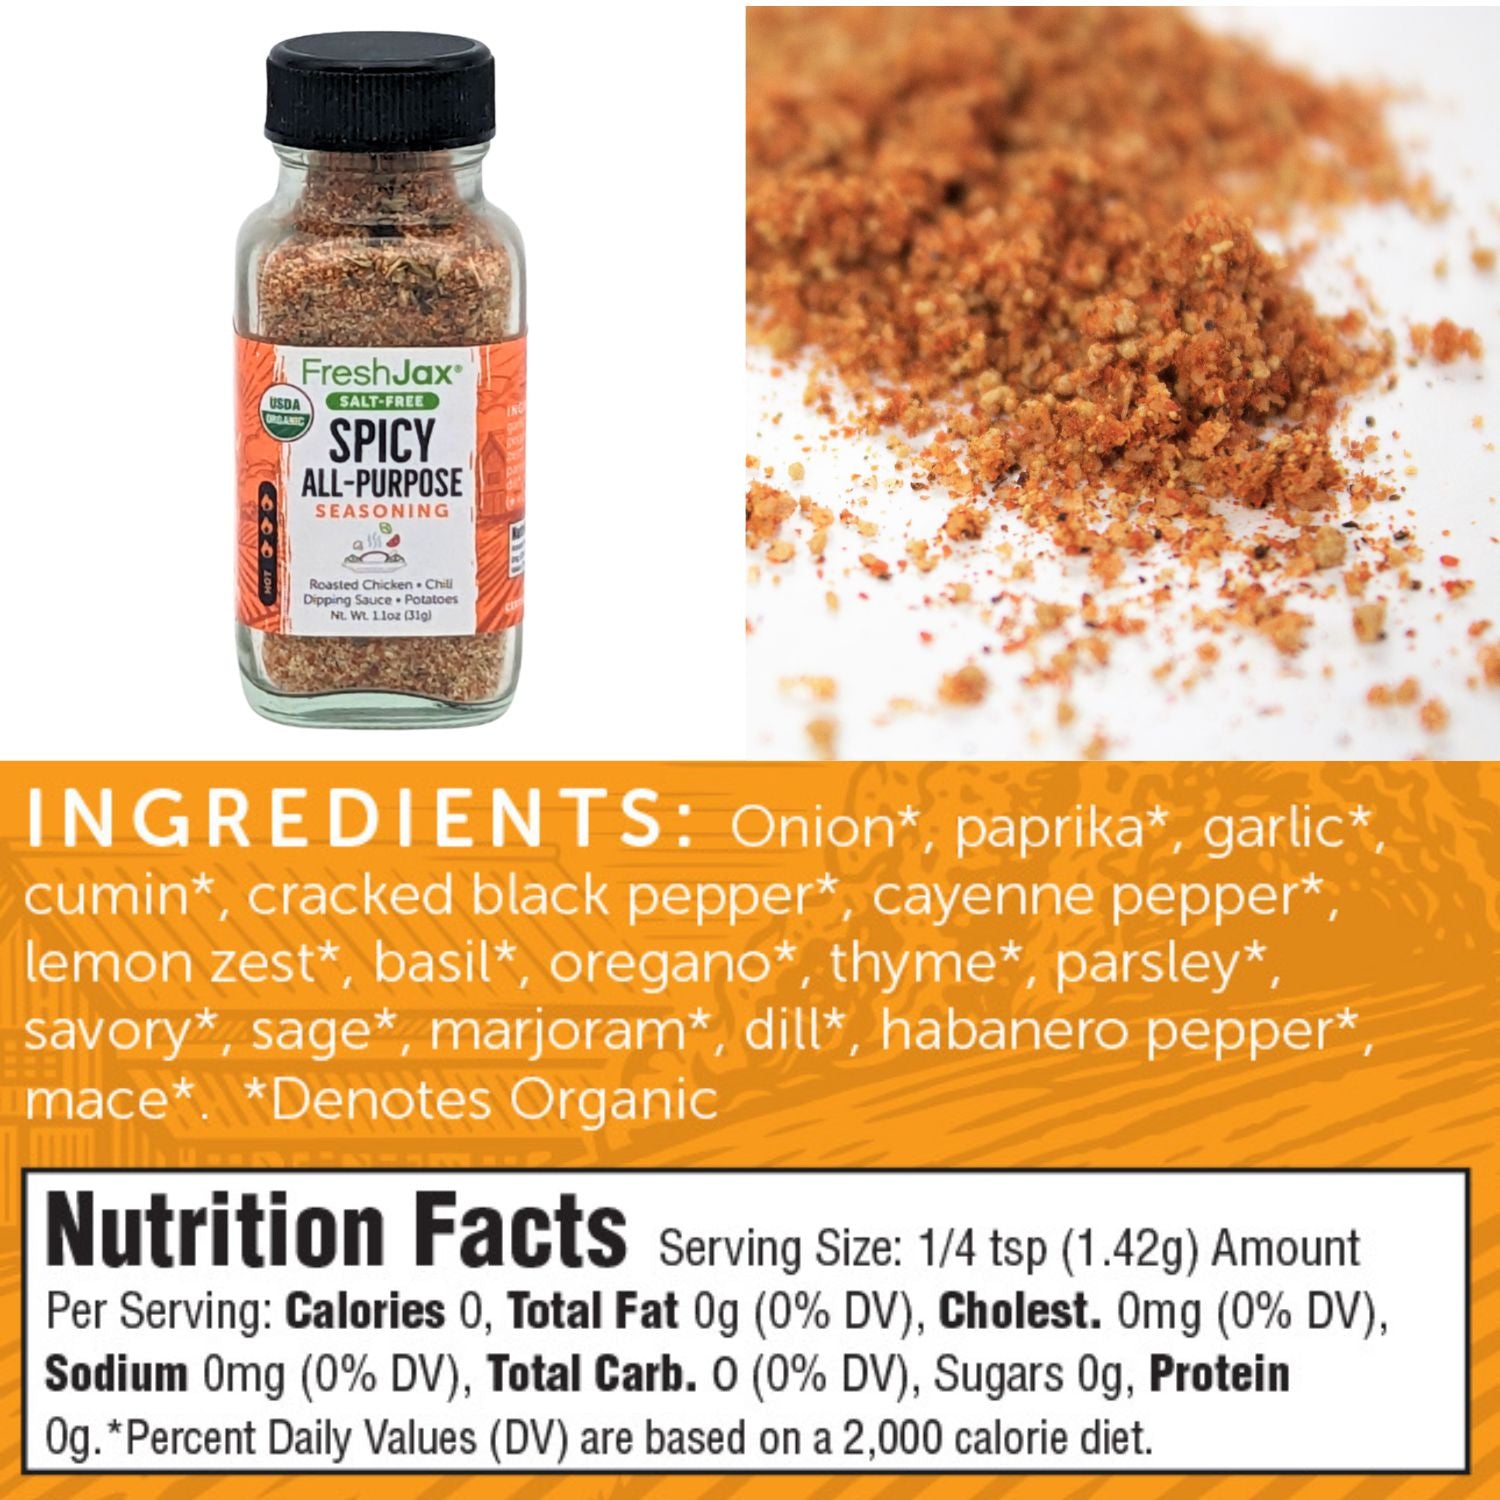 FreshJax Organic Spices Salt-Free Spicy All-Purpose Ingredient and Nutritional Information